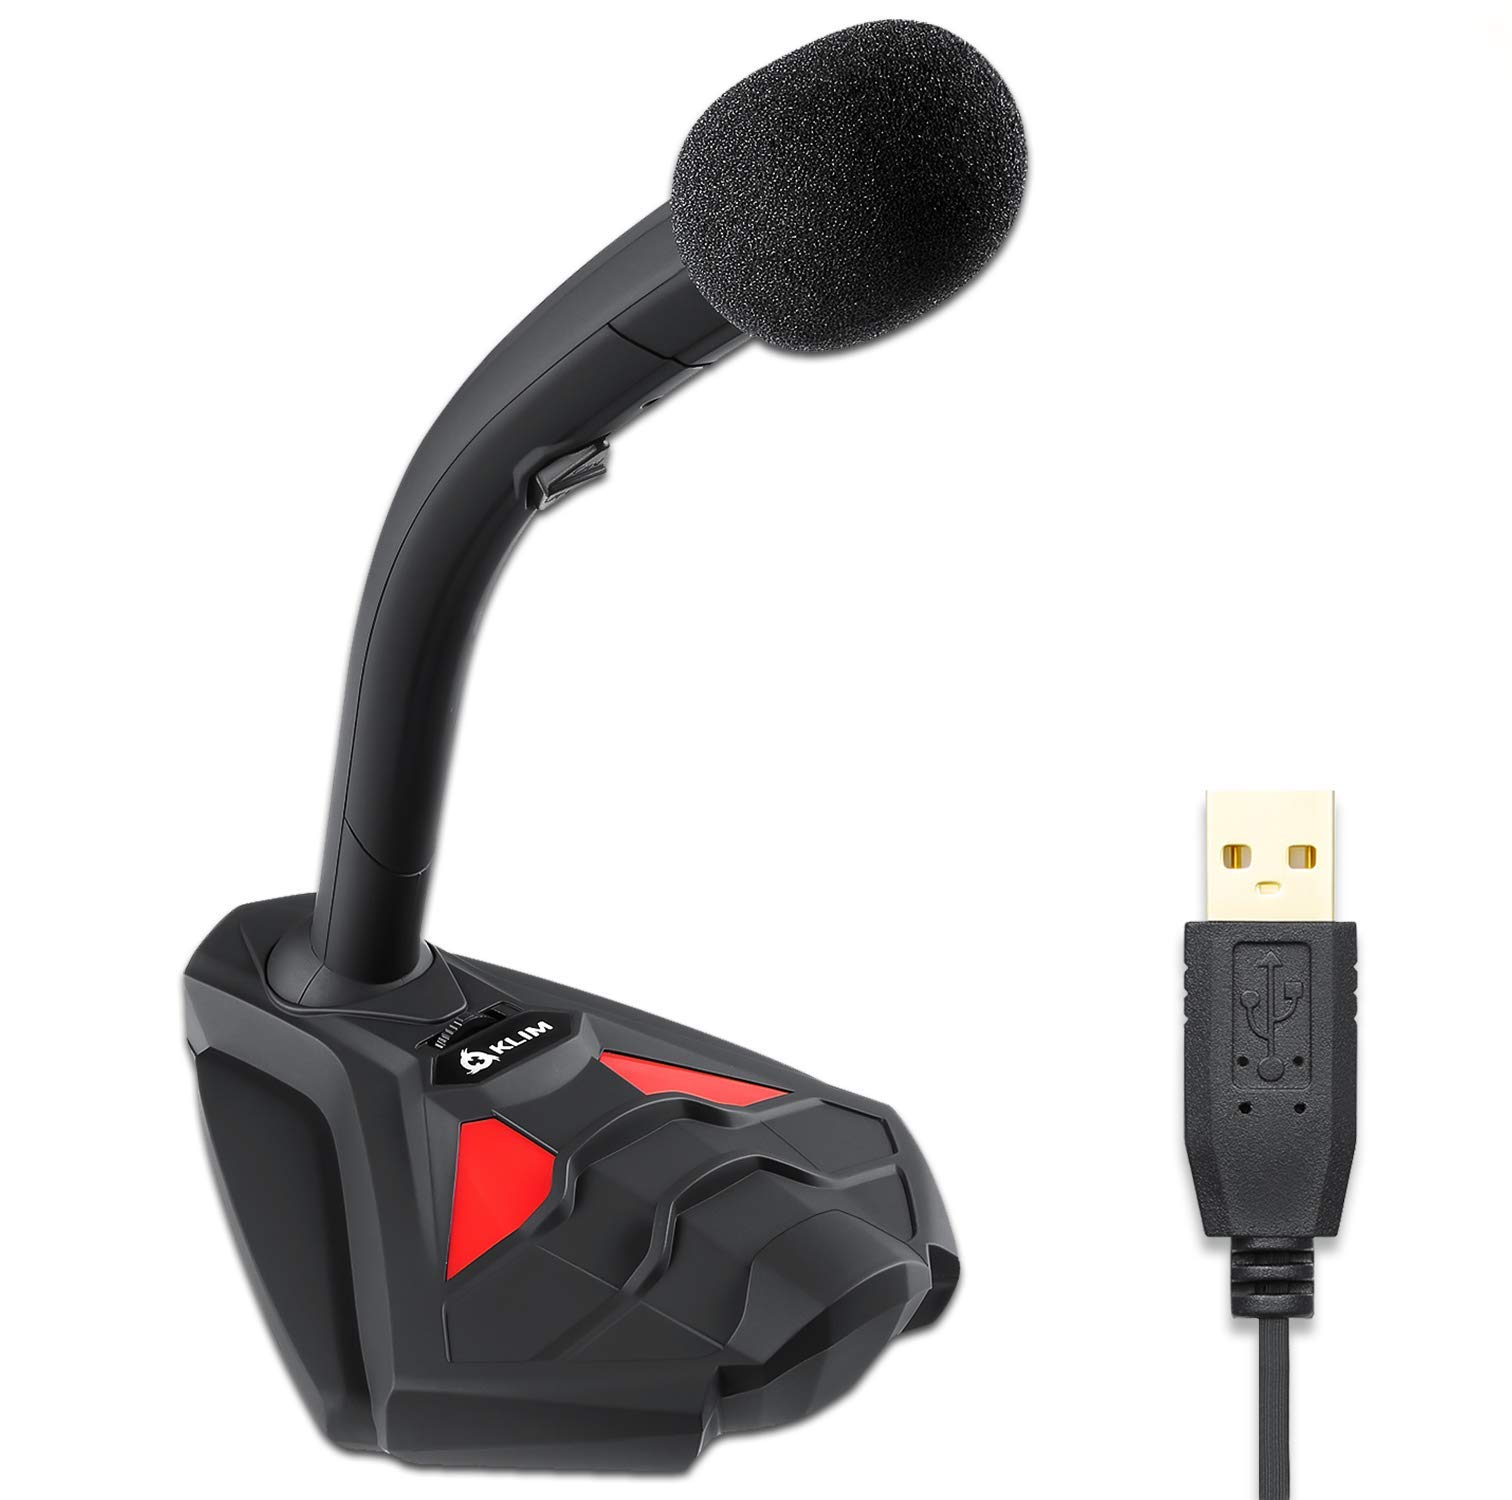 What Kind Of Microphone Do I Need For Voice Recognition